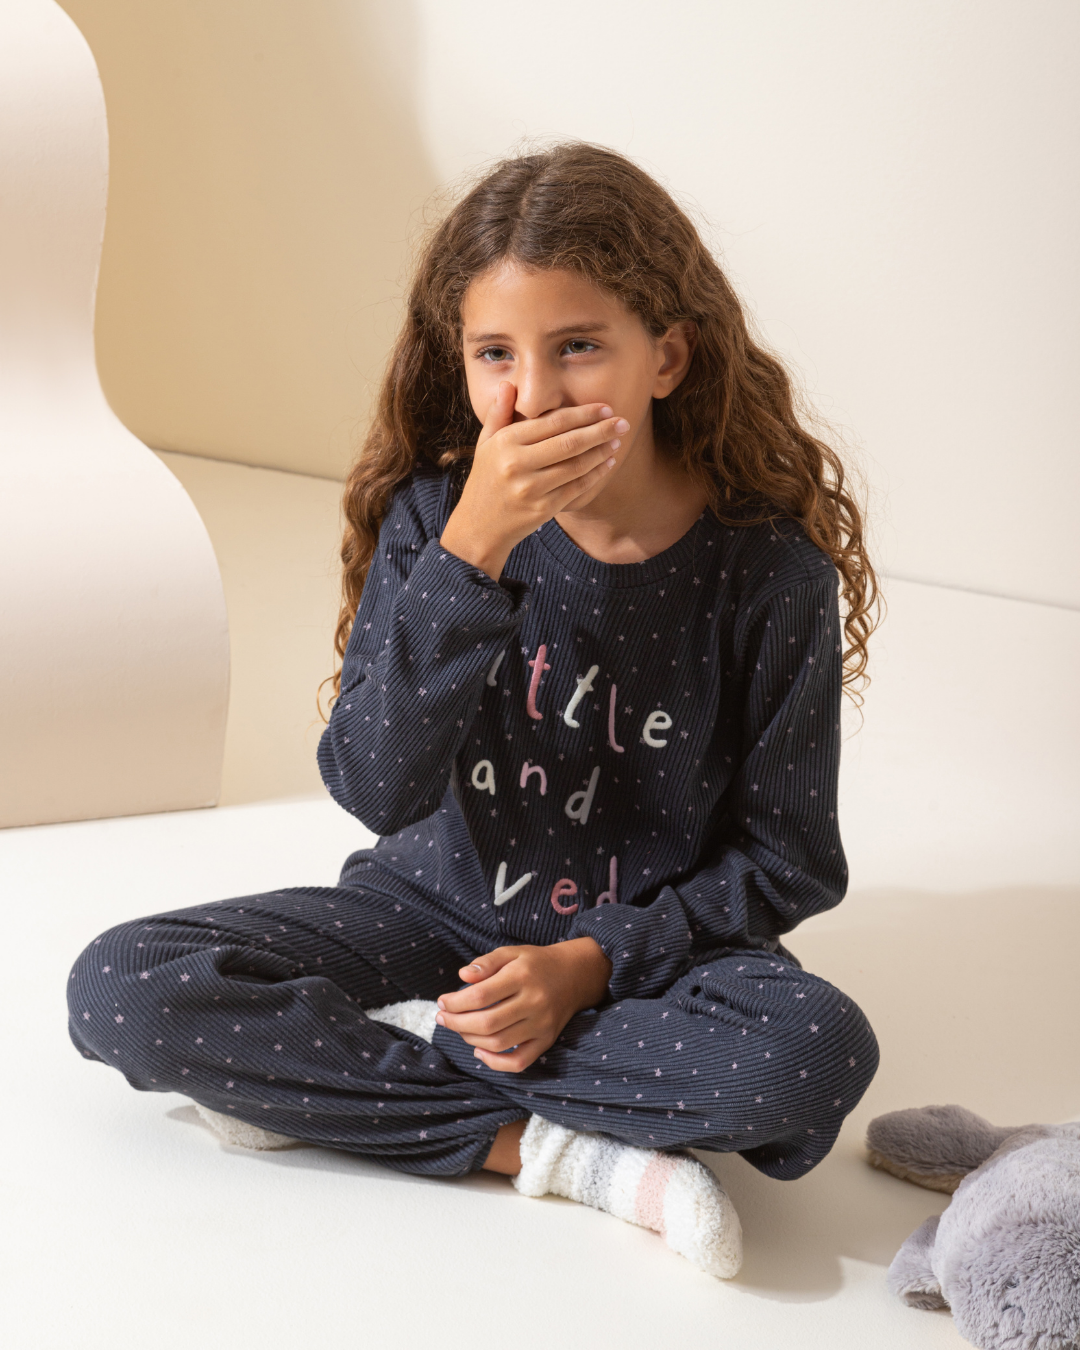 Little and loved girls' long sleeve ribbed jacquard pajamas